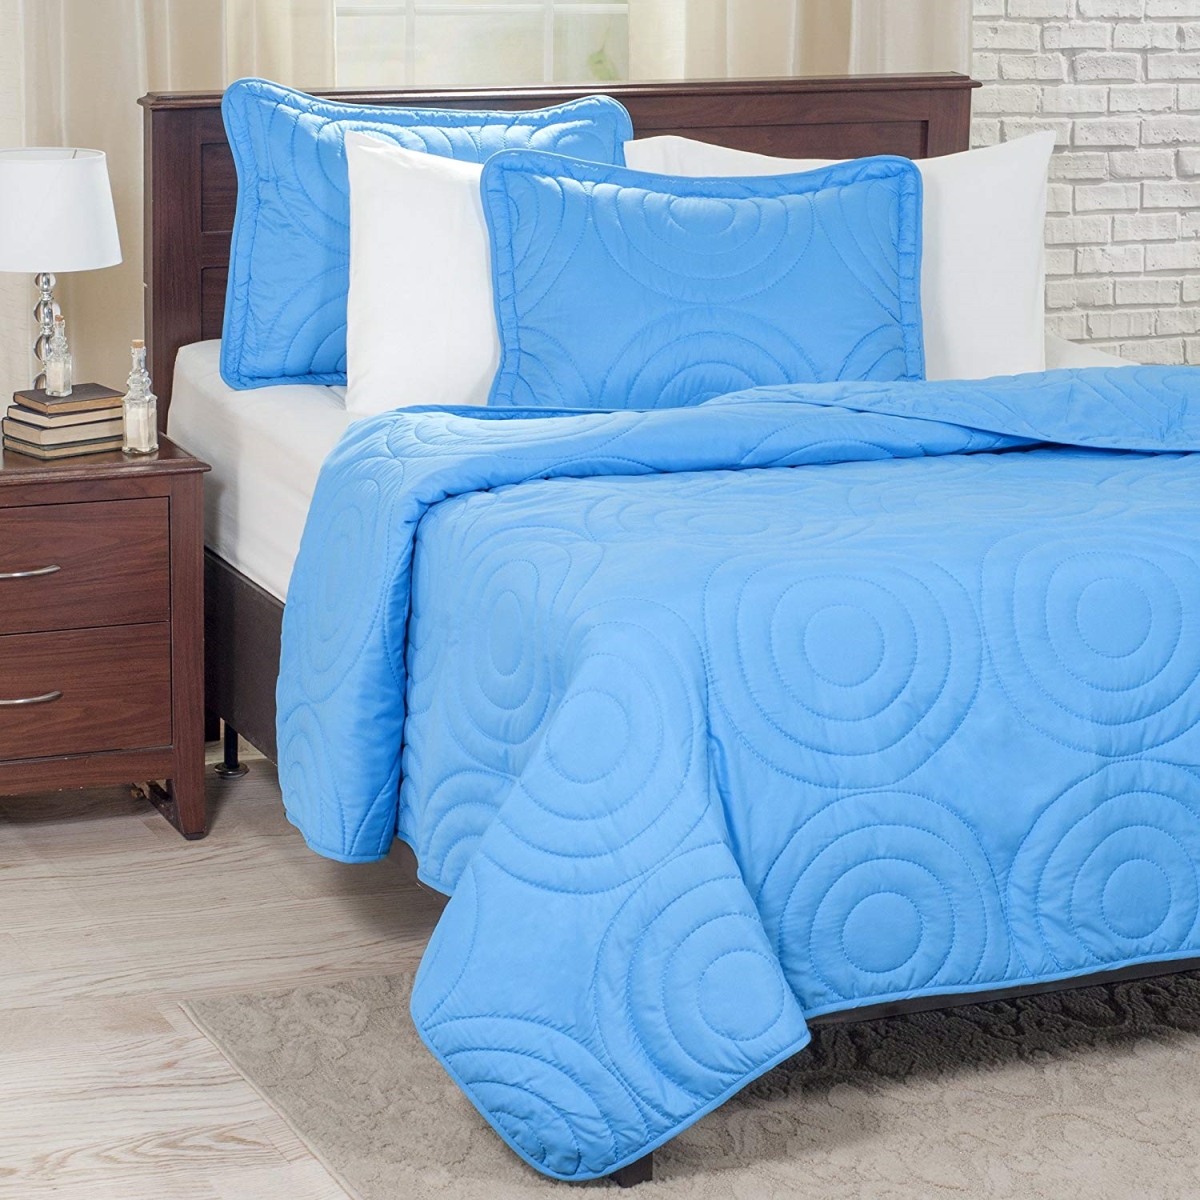 66a-01882 Solid Embossed 3 Piece Quilt Set - Full & Queen Size - Blue